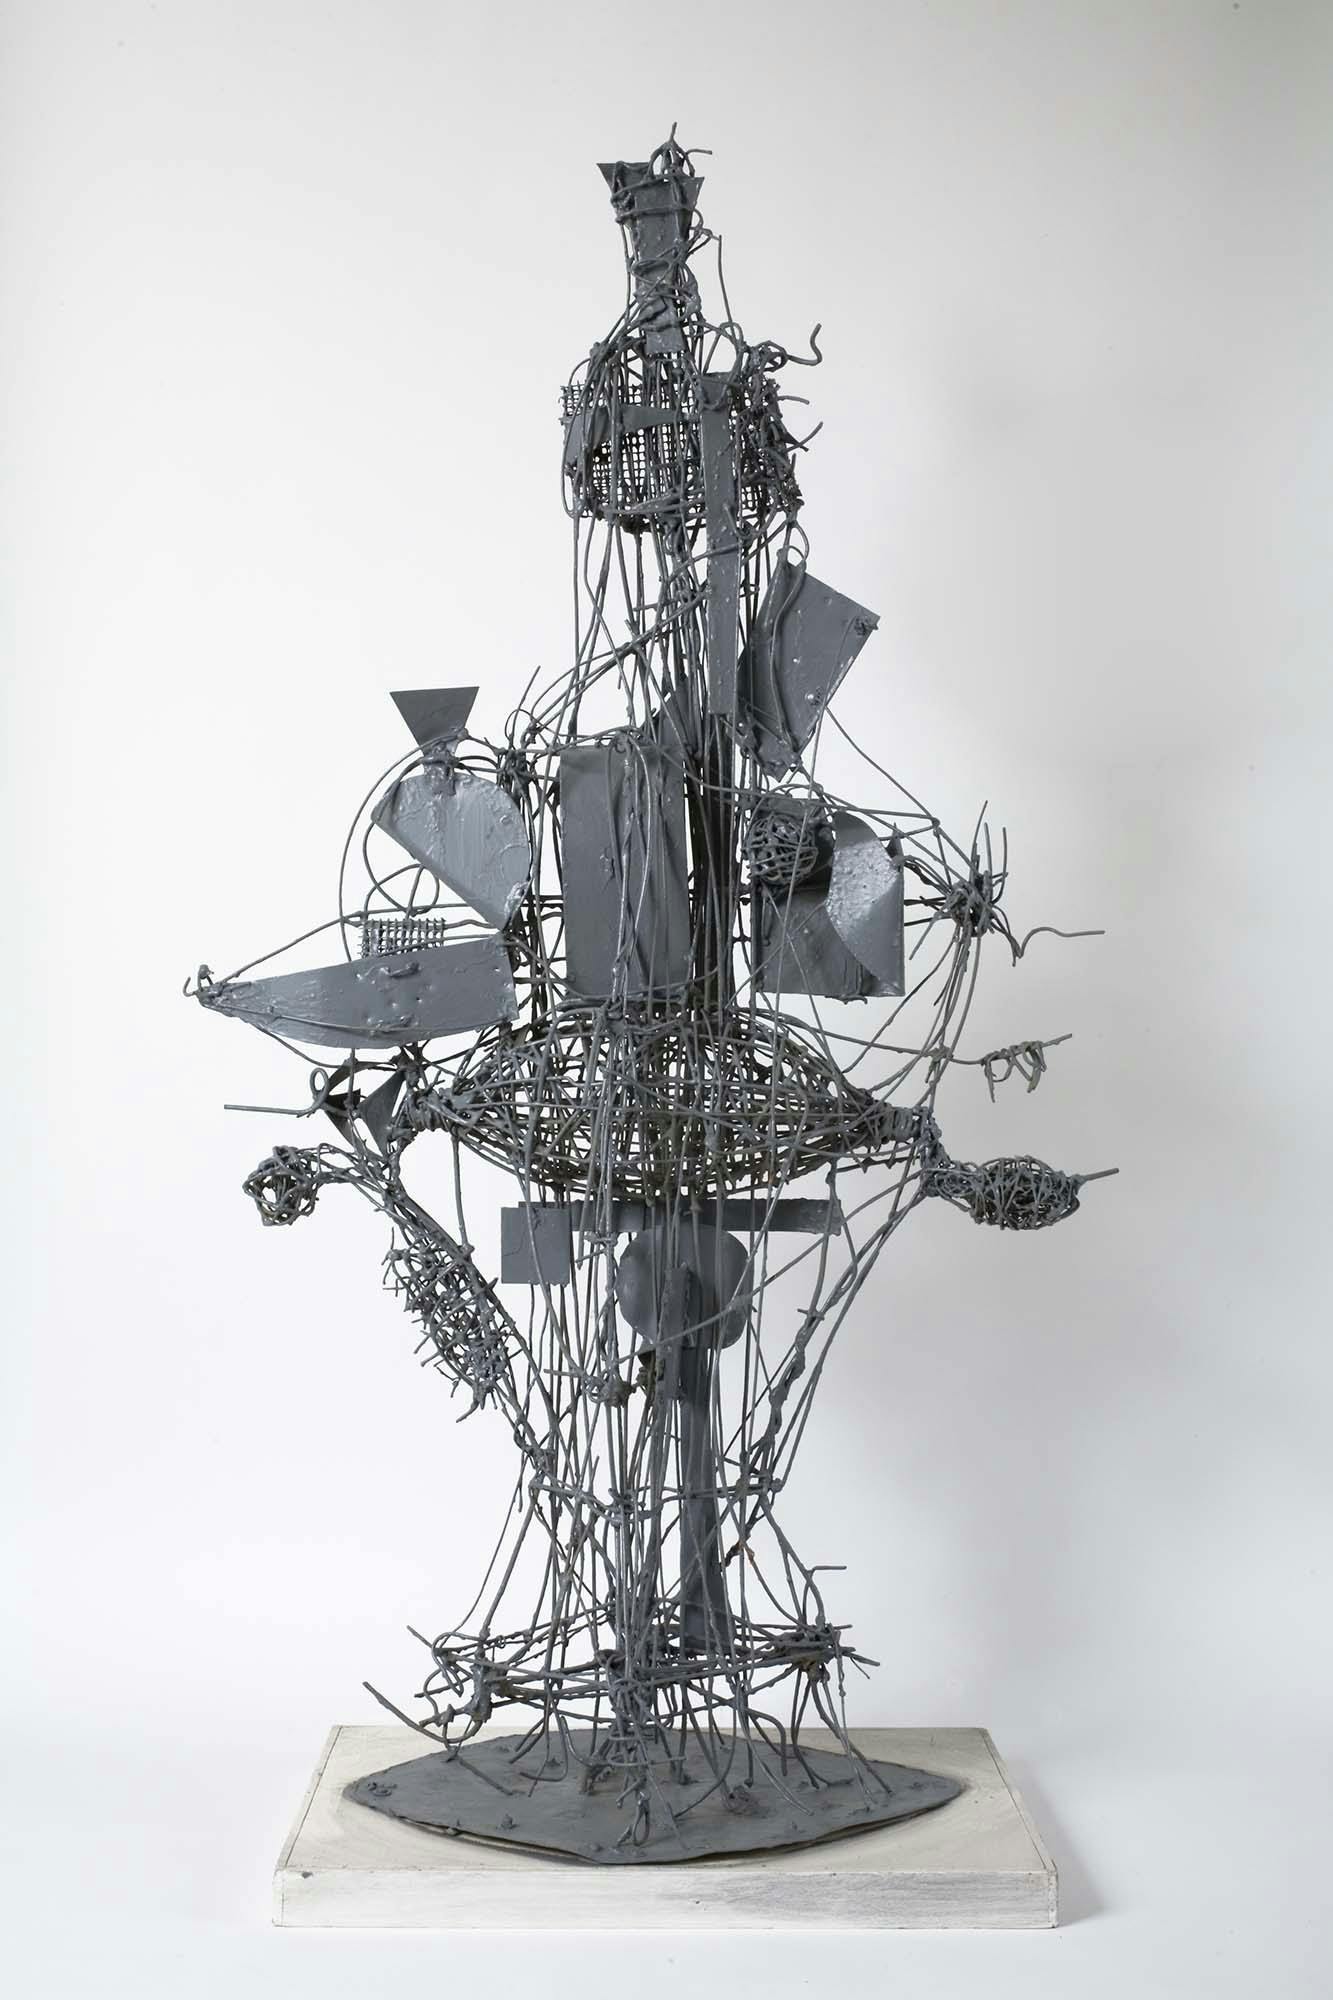 Creature of Clouds
1951
Steel wire and sheet metal, painted gray
49 1/2 x 28 x 14 in. (125.7 x 71.1 x 35.6 cm)
 – The Richard Pousette-Dart Foundation